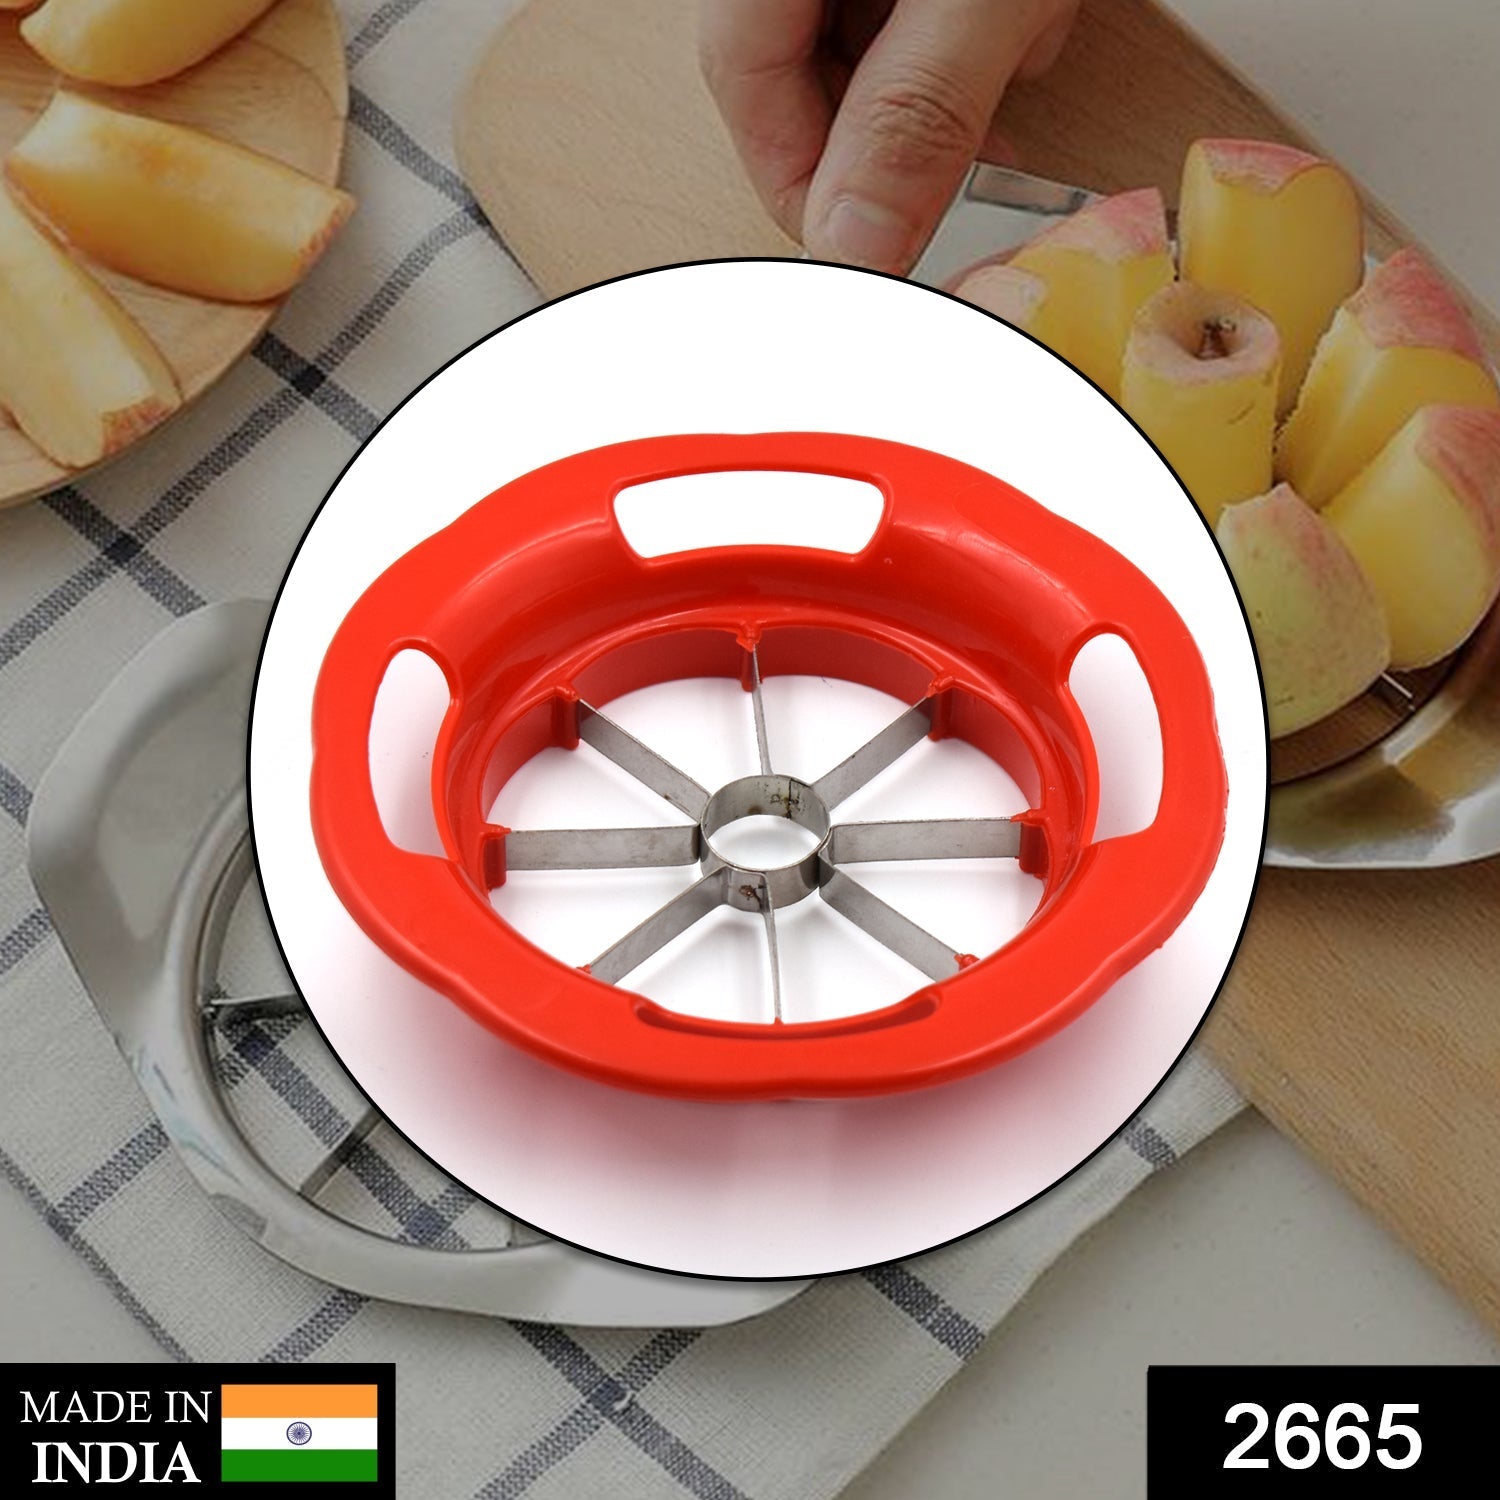 2665 Big Round Apple Cutter and shredder tool with effective sharp chopping blade system.